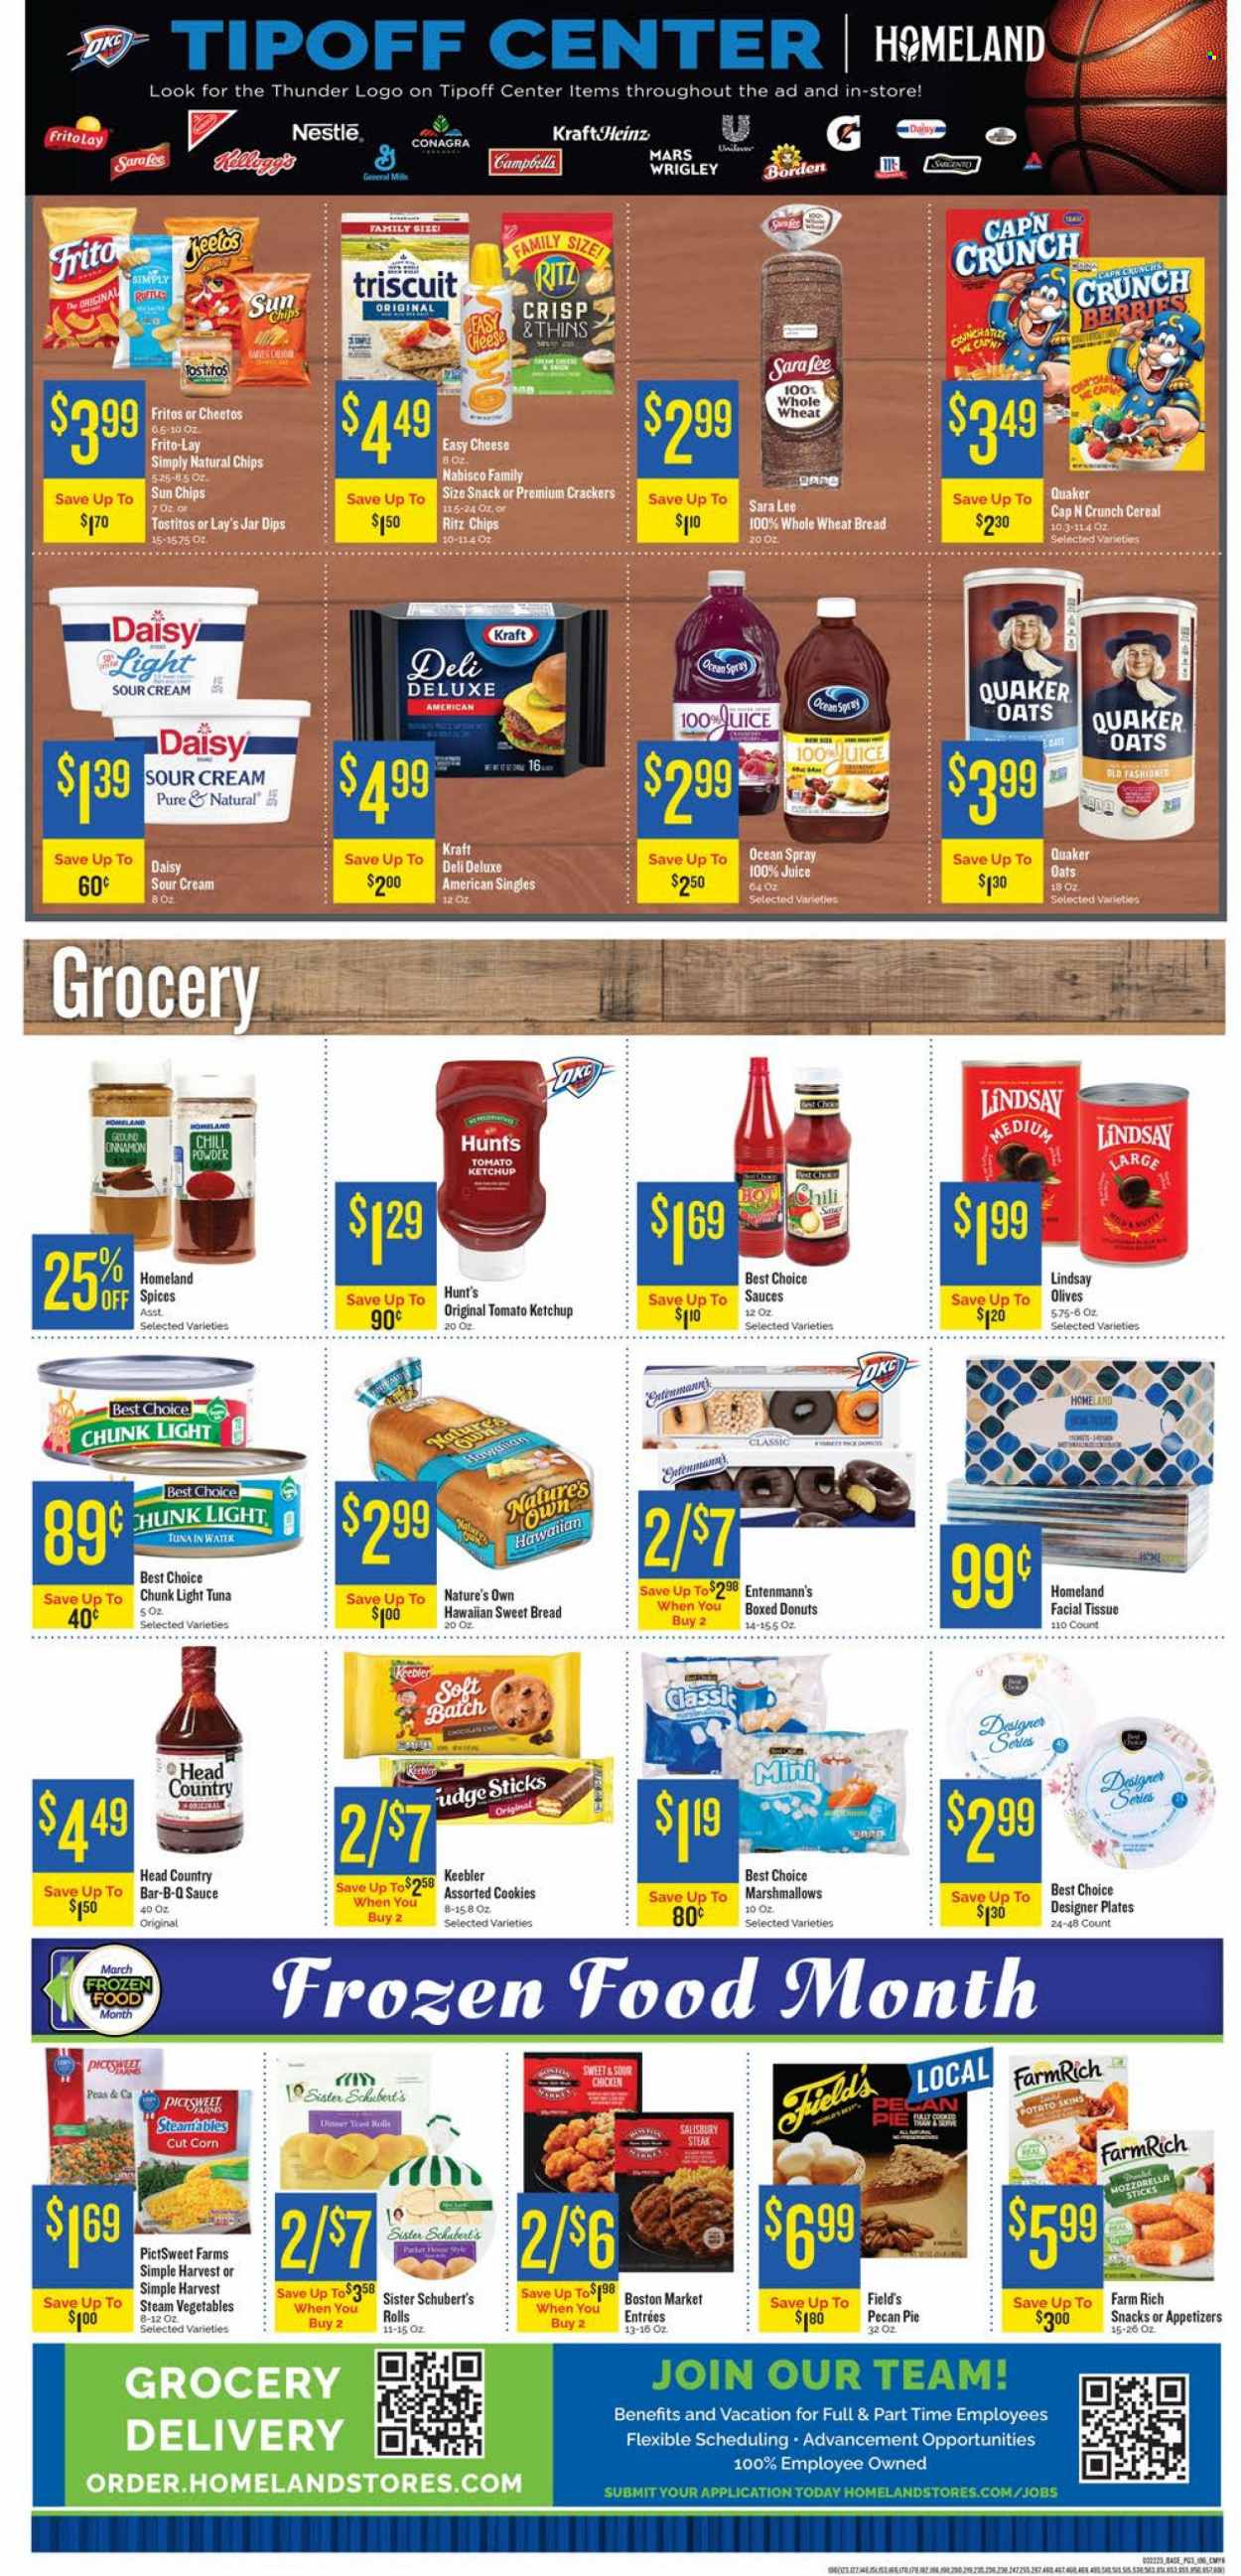 thumbnail - Homeland Flyer - 03/22/2023 - 03/28/2023 - Sales products - wheat bread, pie, Sara Lee, sweet bread, donut, Entenmann's, corn, tuna, Quaker, Kraft®, mozzarella, Sargento, yeast, sour cream, cookies, marshmallows, Nestlé, snack, Mars, crackers, Keebler, RITZ, Fritos, Cheetos, Lay’s, Thins, Frito-Lay, Ruffles, Tostitos, oats, tuna in water, Heinz, olives, light tuna, cereals, ketchup, juice, water, chicken, steak, tissues, Nature's Own. Page 3.